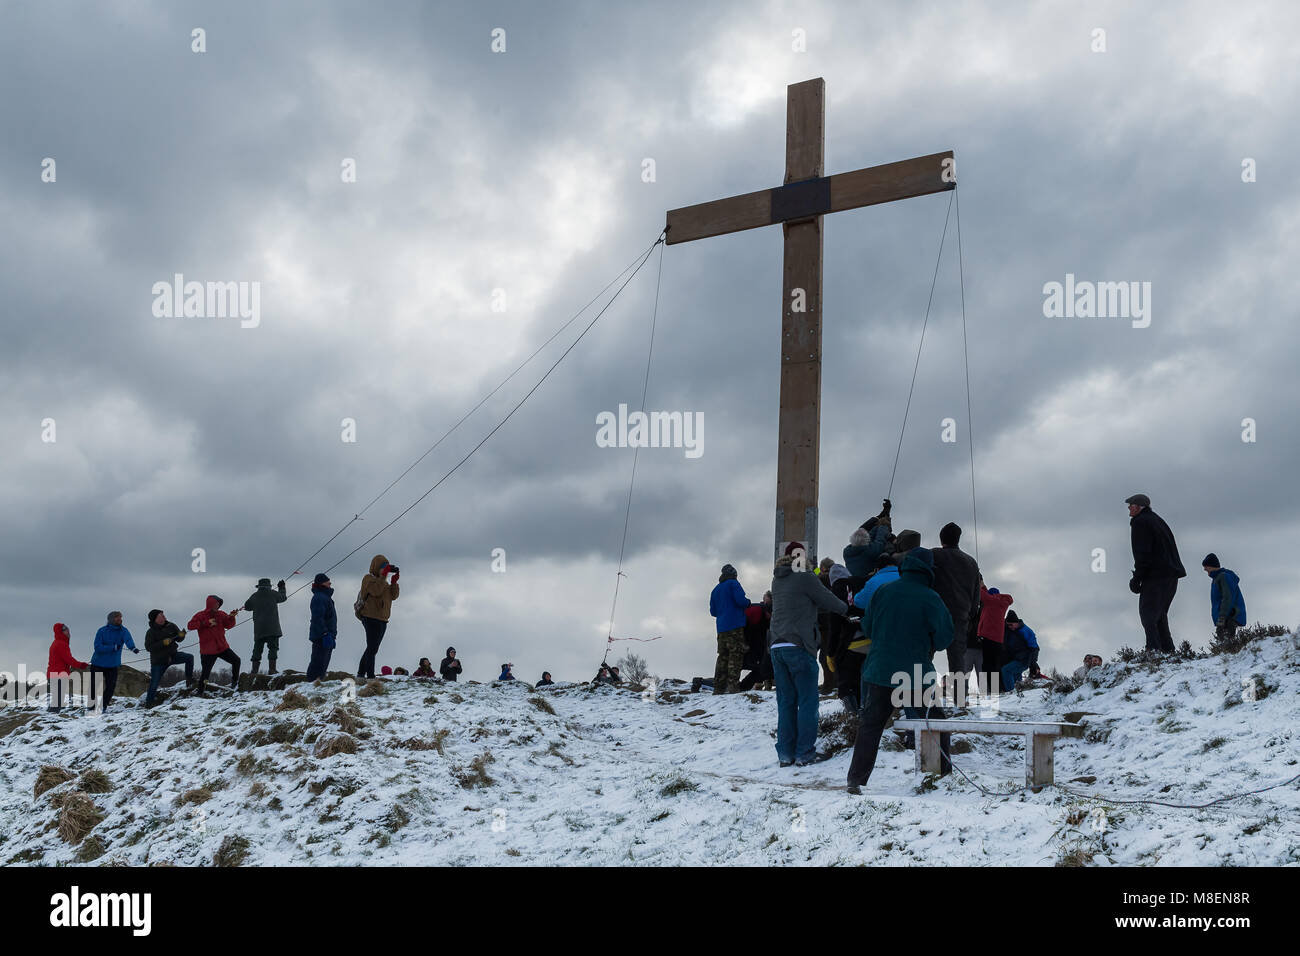 Otley Chevin, UK, 17th March 2018. On a cold, snowy morning, volunteers from the local churches, using ropes, raise the enormous, heavy, wooden, Easter Cross on The Chevin, a high ridge overlooking the town of Otley, West Yorkshire, England, UK. A Christian symbol of faith & hope. Credit: Ian Lamond/Alamy Live News Stock Photo